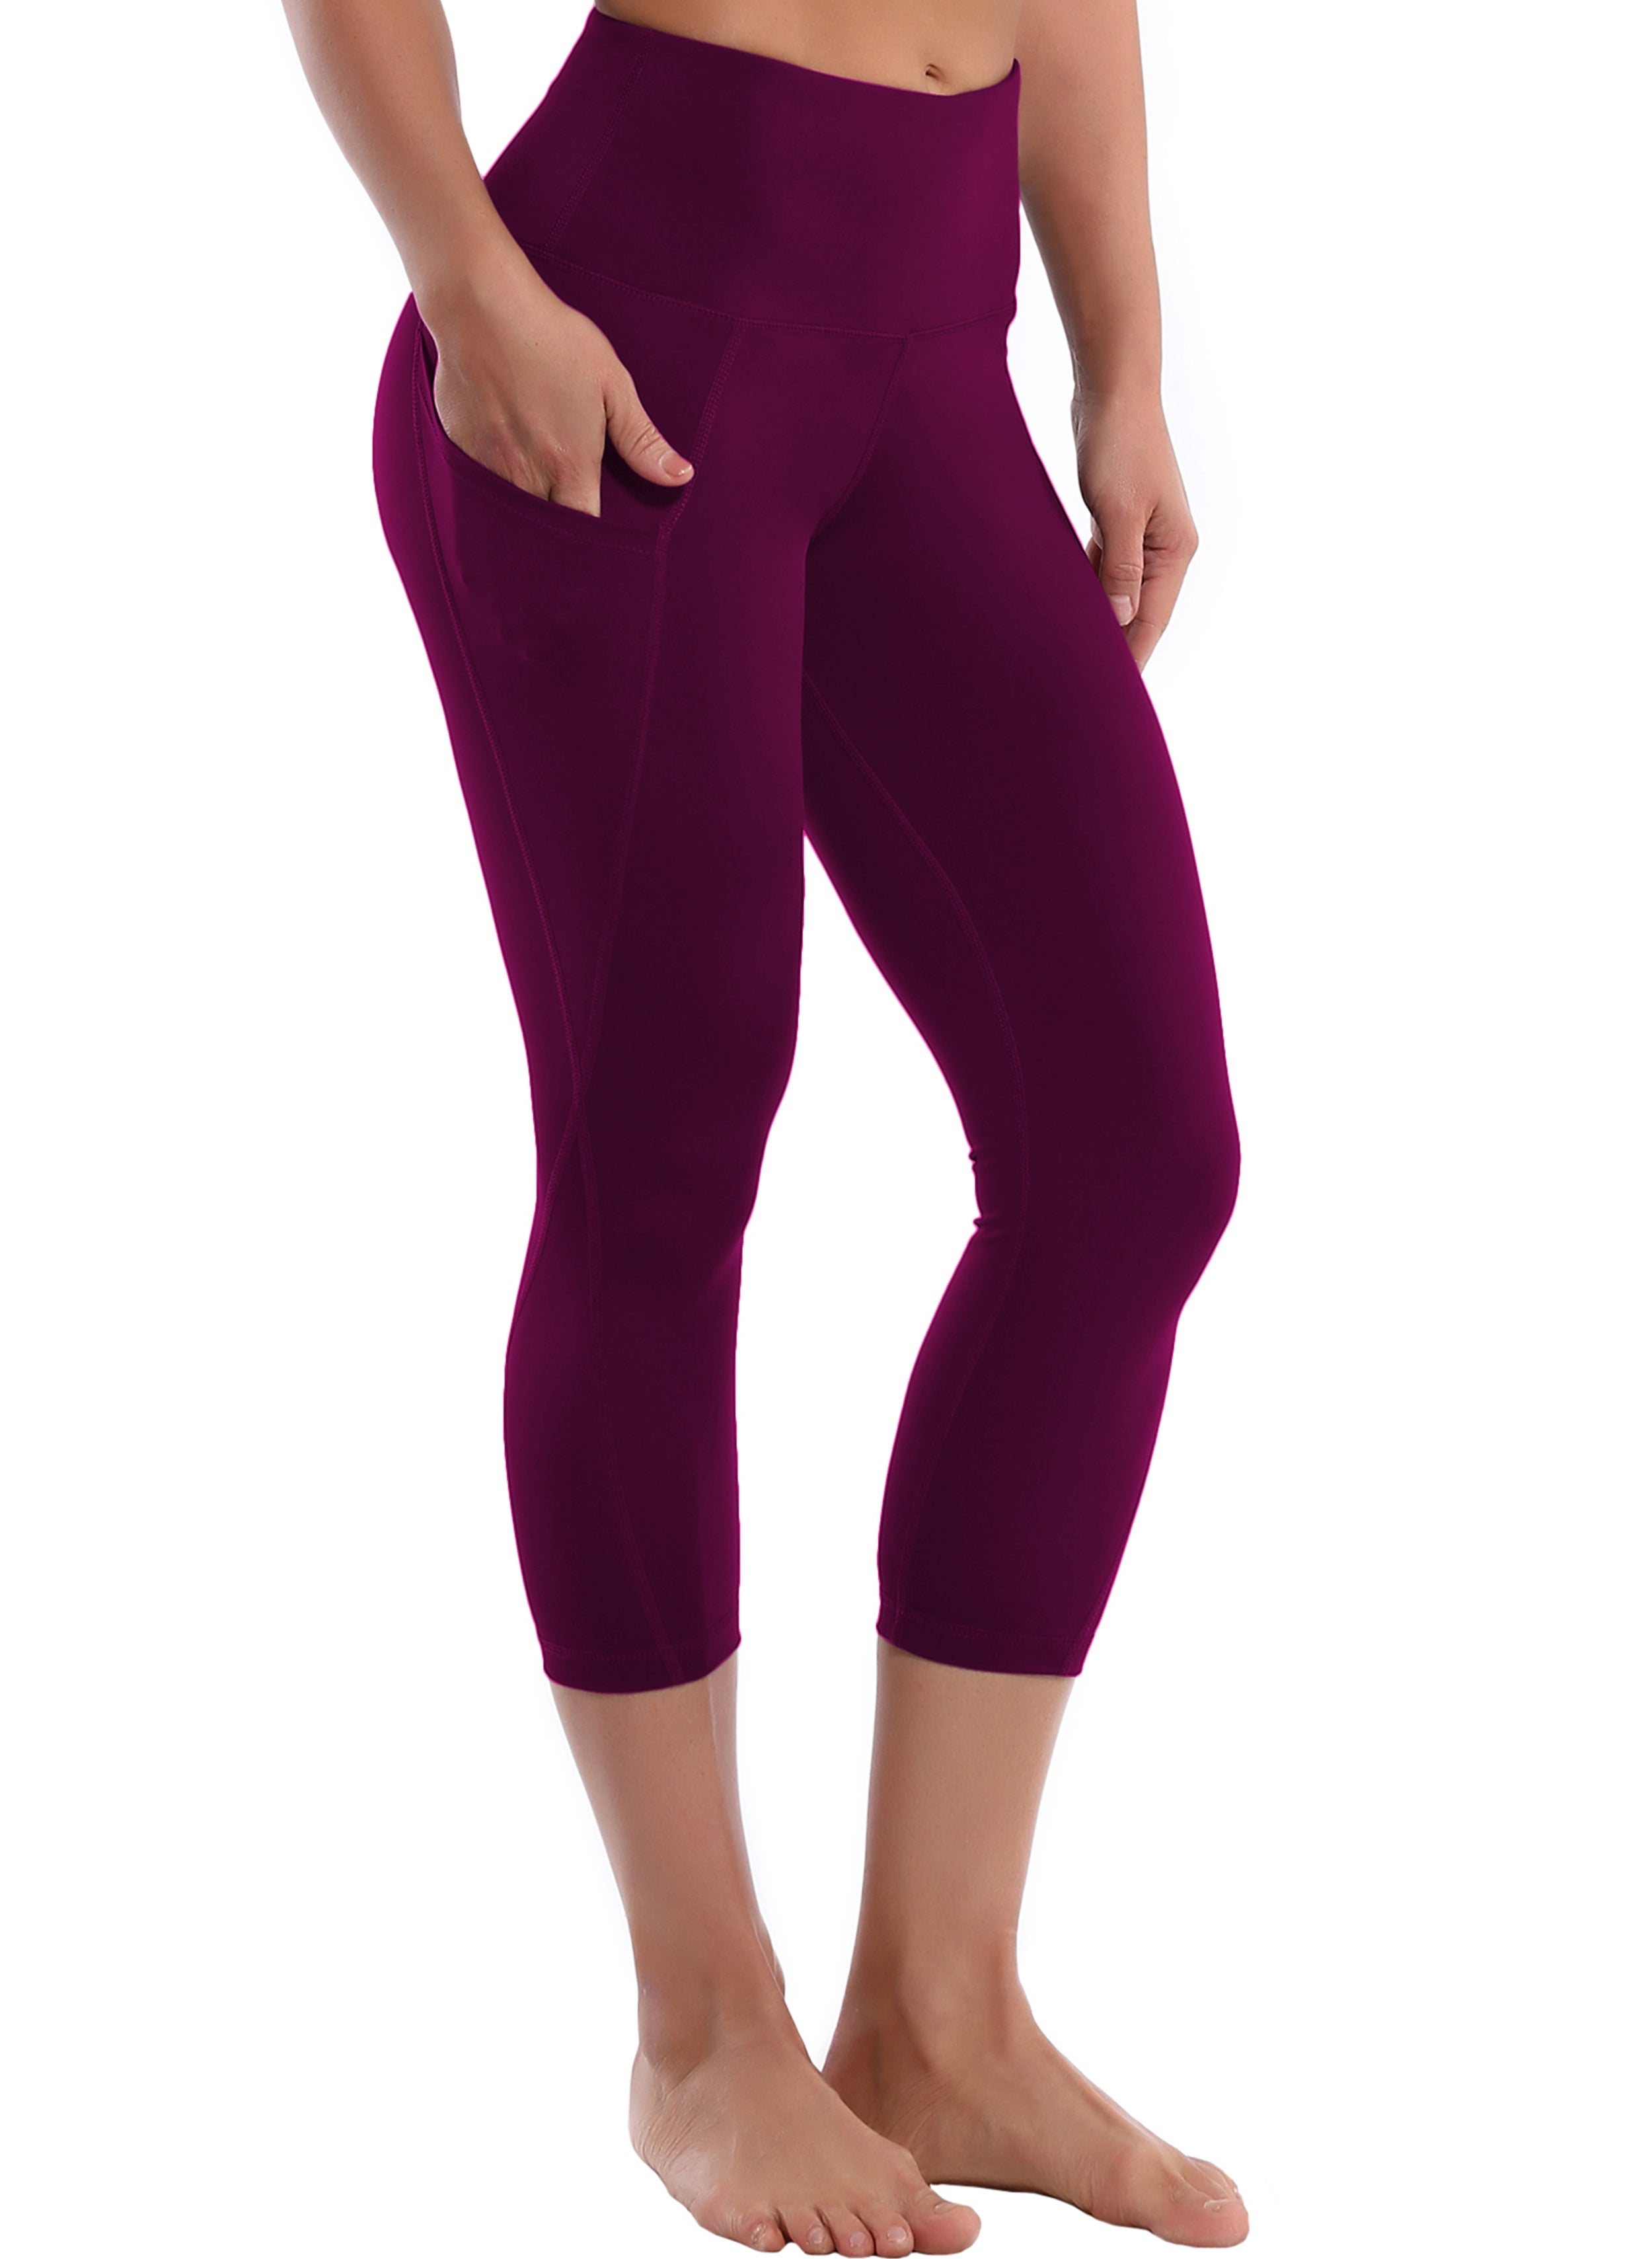 19" High Waist Side Pockets Capris grapevine 75%Nylon/25%Spandex Fabric doesn't attract lint easily 4-way stretch No see-through Moisture-wicking Tummy control Inner pocket